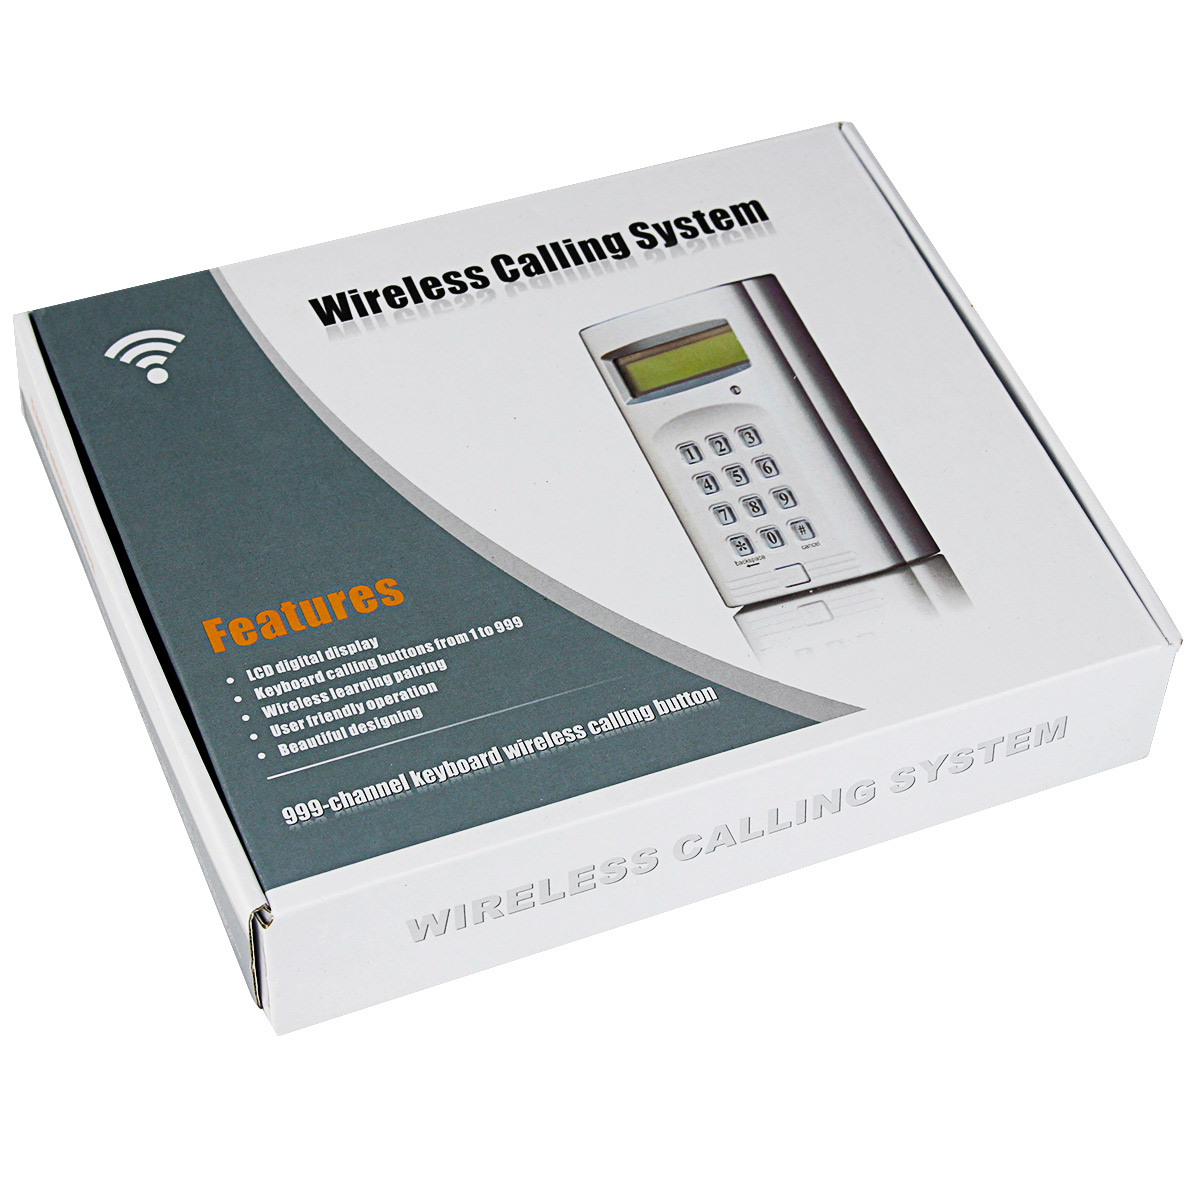 Wireless Calling Restaurant Cafe Paging Queuing System Keyboard Transmitter+Host